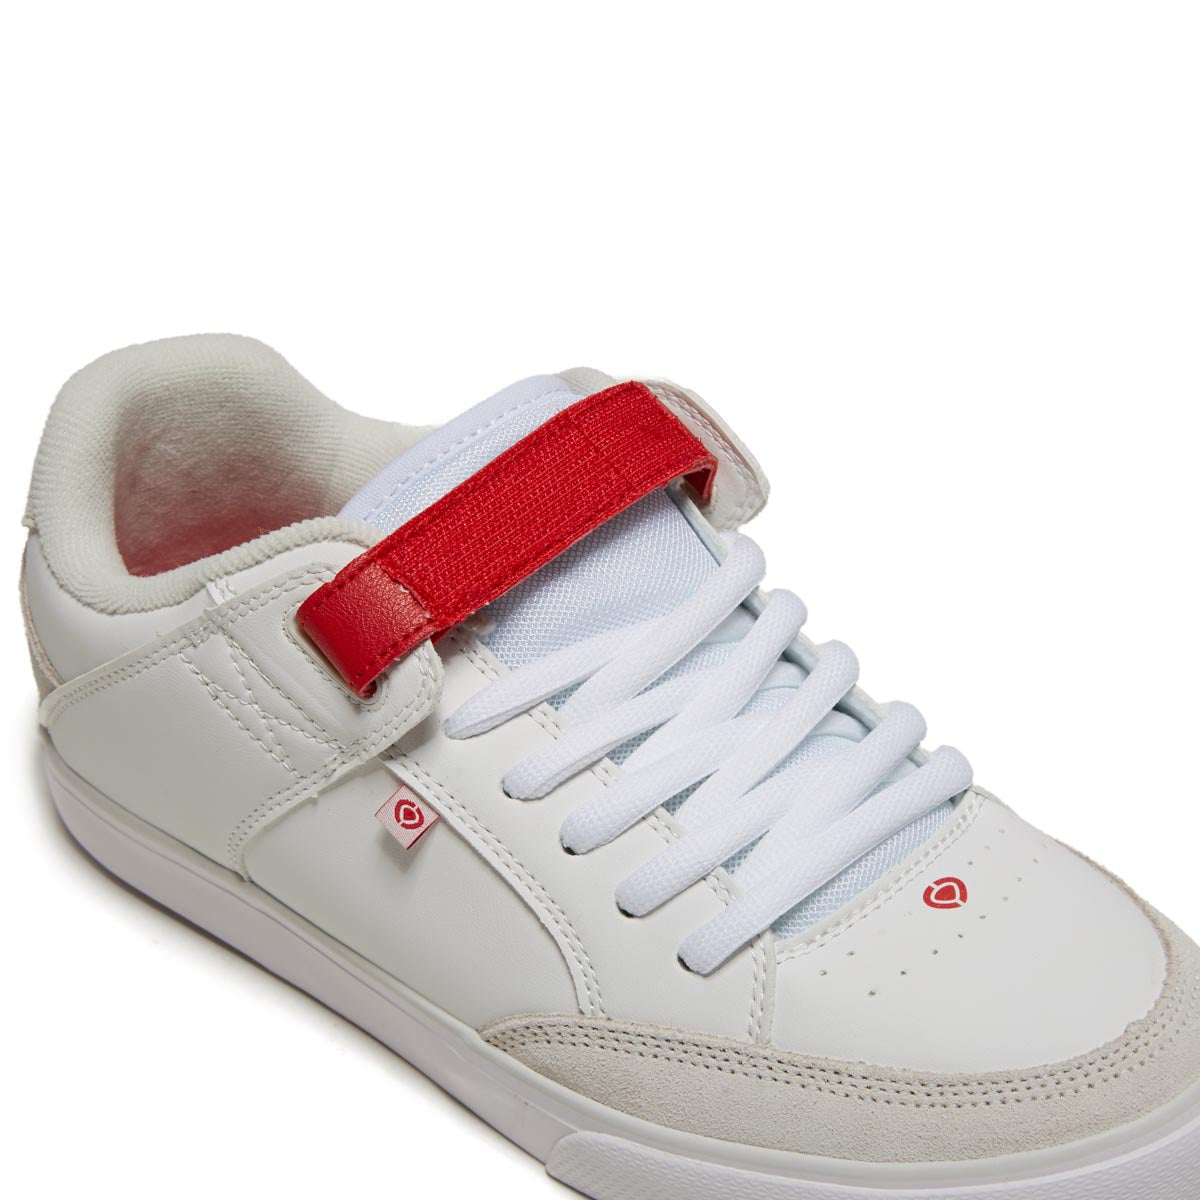 C1rca 205 Vulc Shoes - White/Red image 5